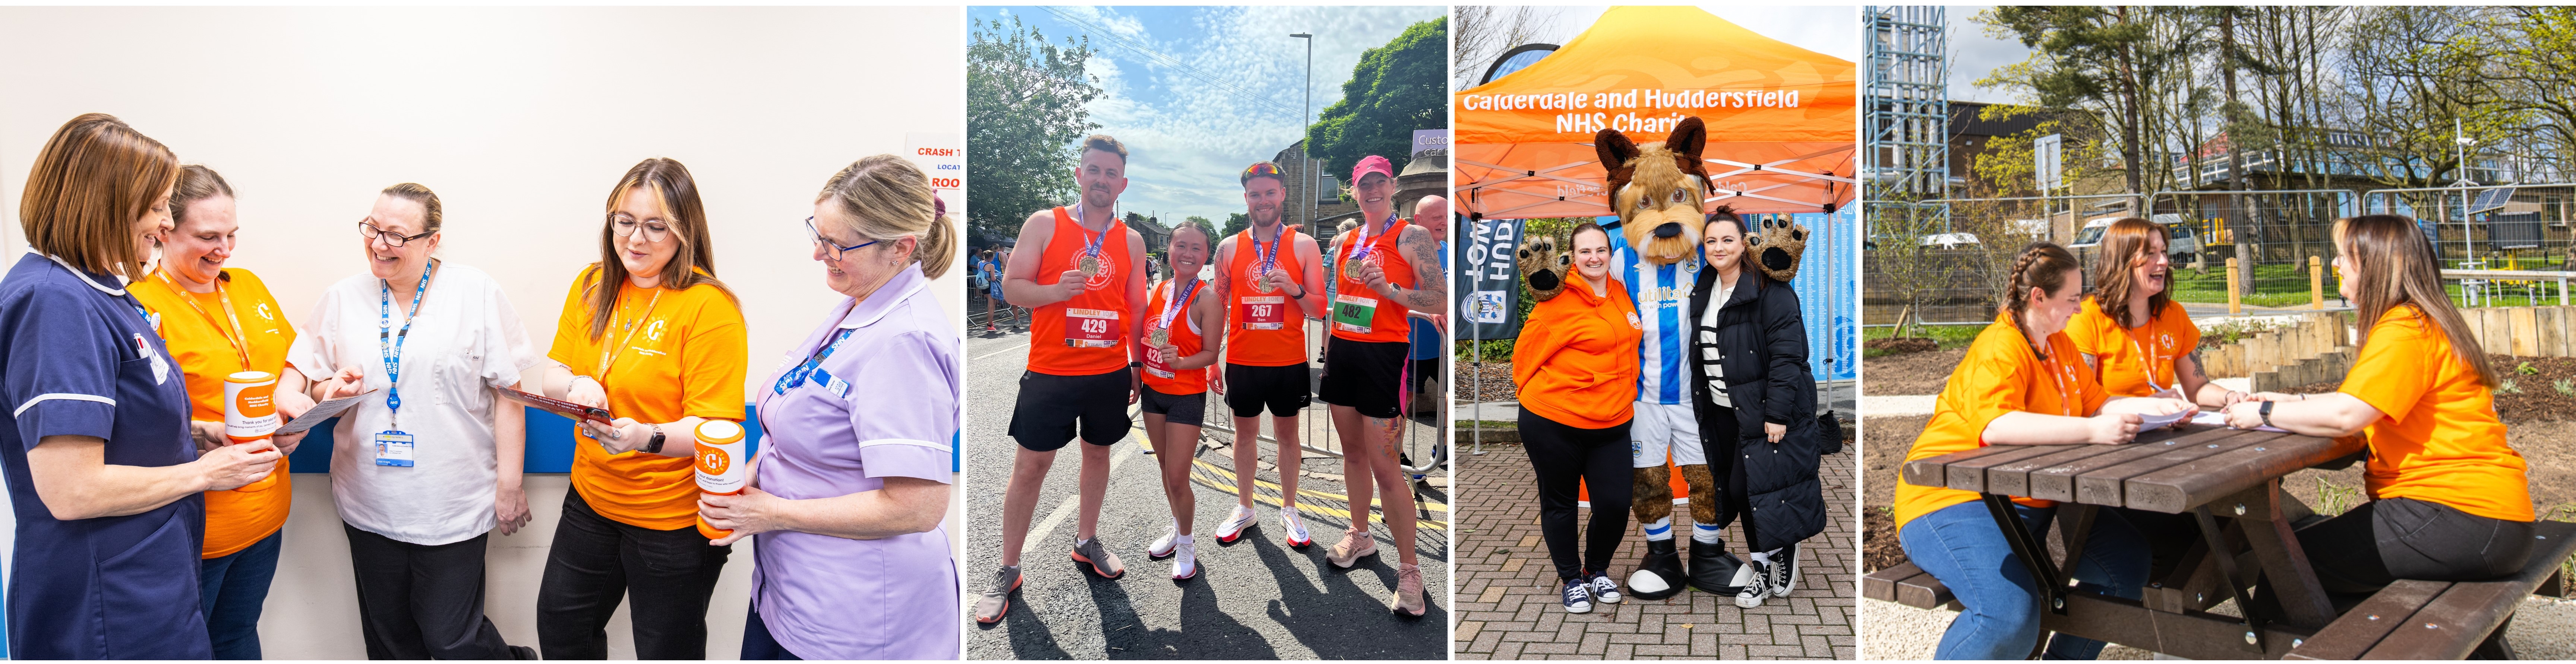 Group of colleagues smiling and giggling with charity team, group of fundraisers with their medals at the end of a race, two charity colleagues stood with a football mascot at engagement stand and CHFT Charity team during a meeting.